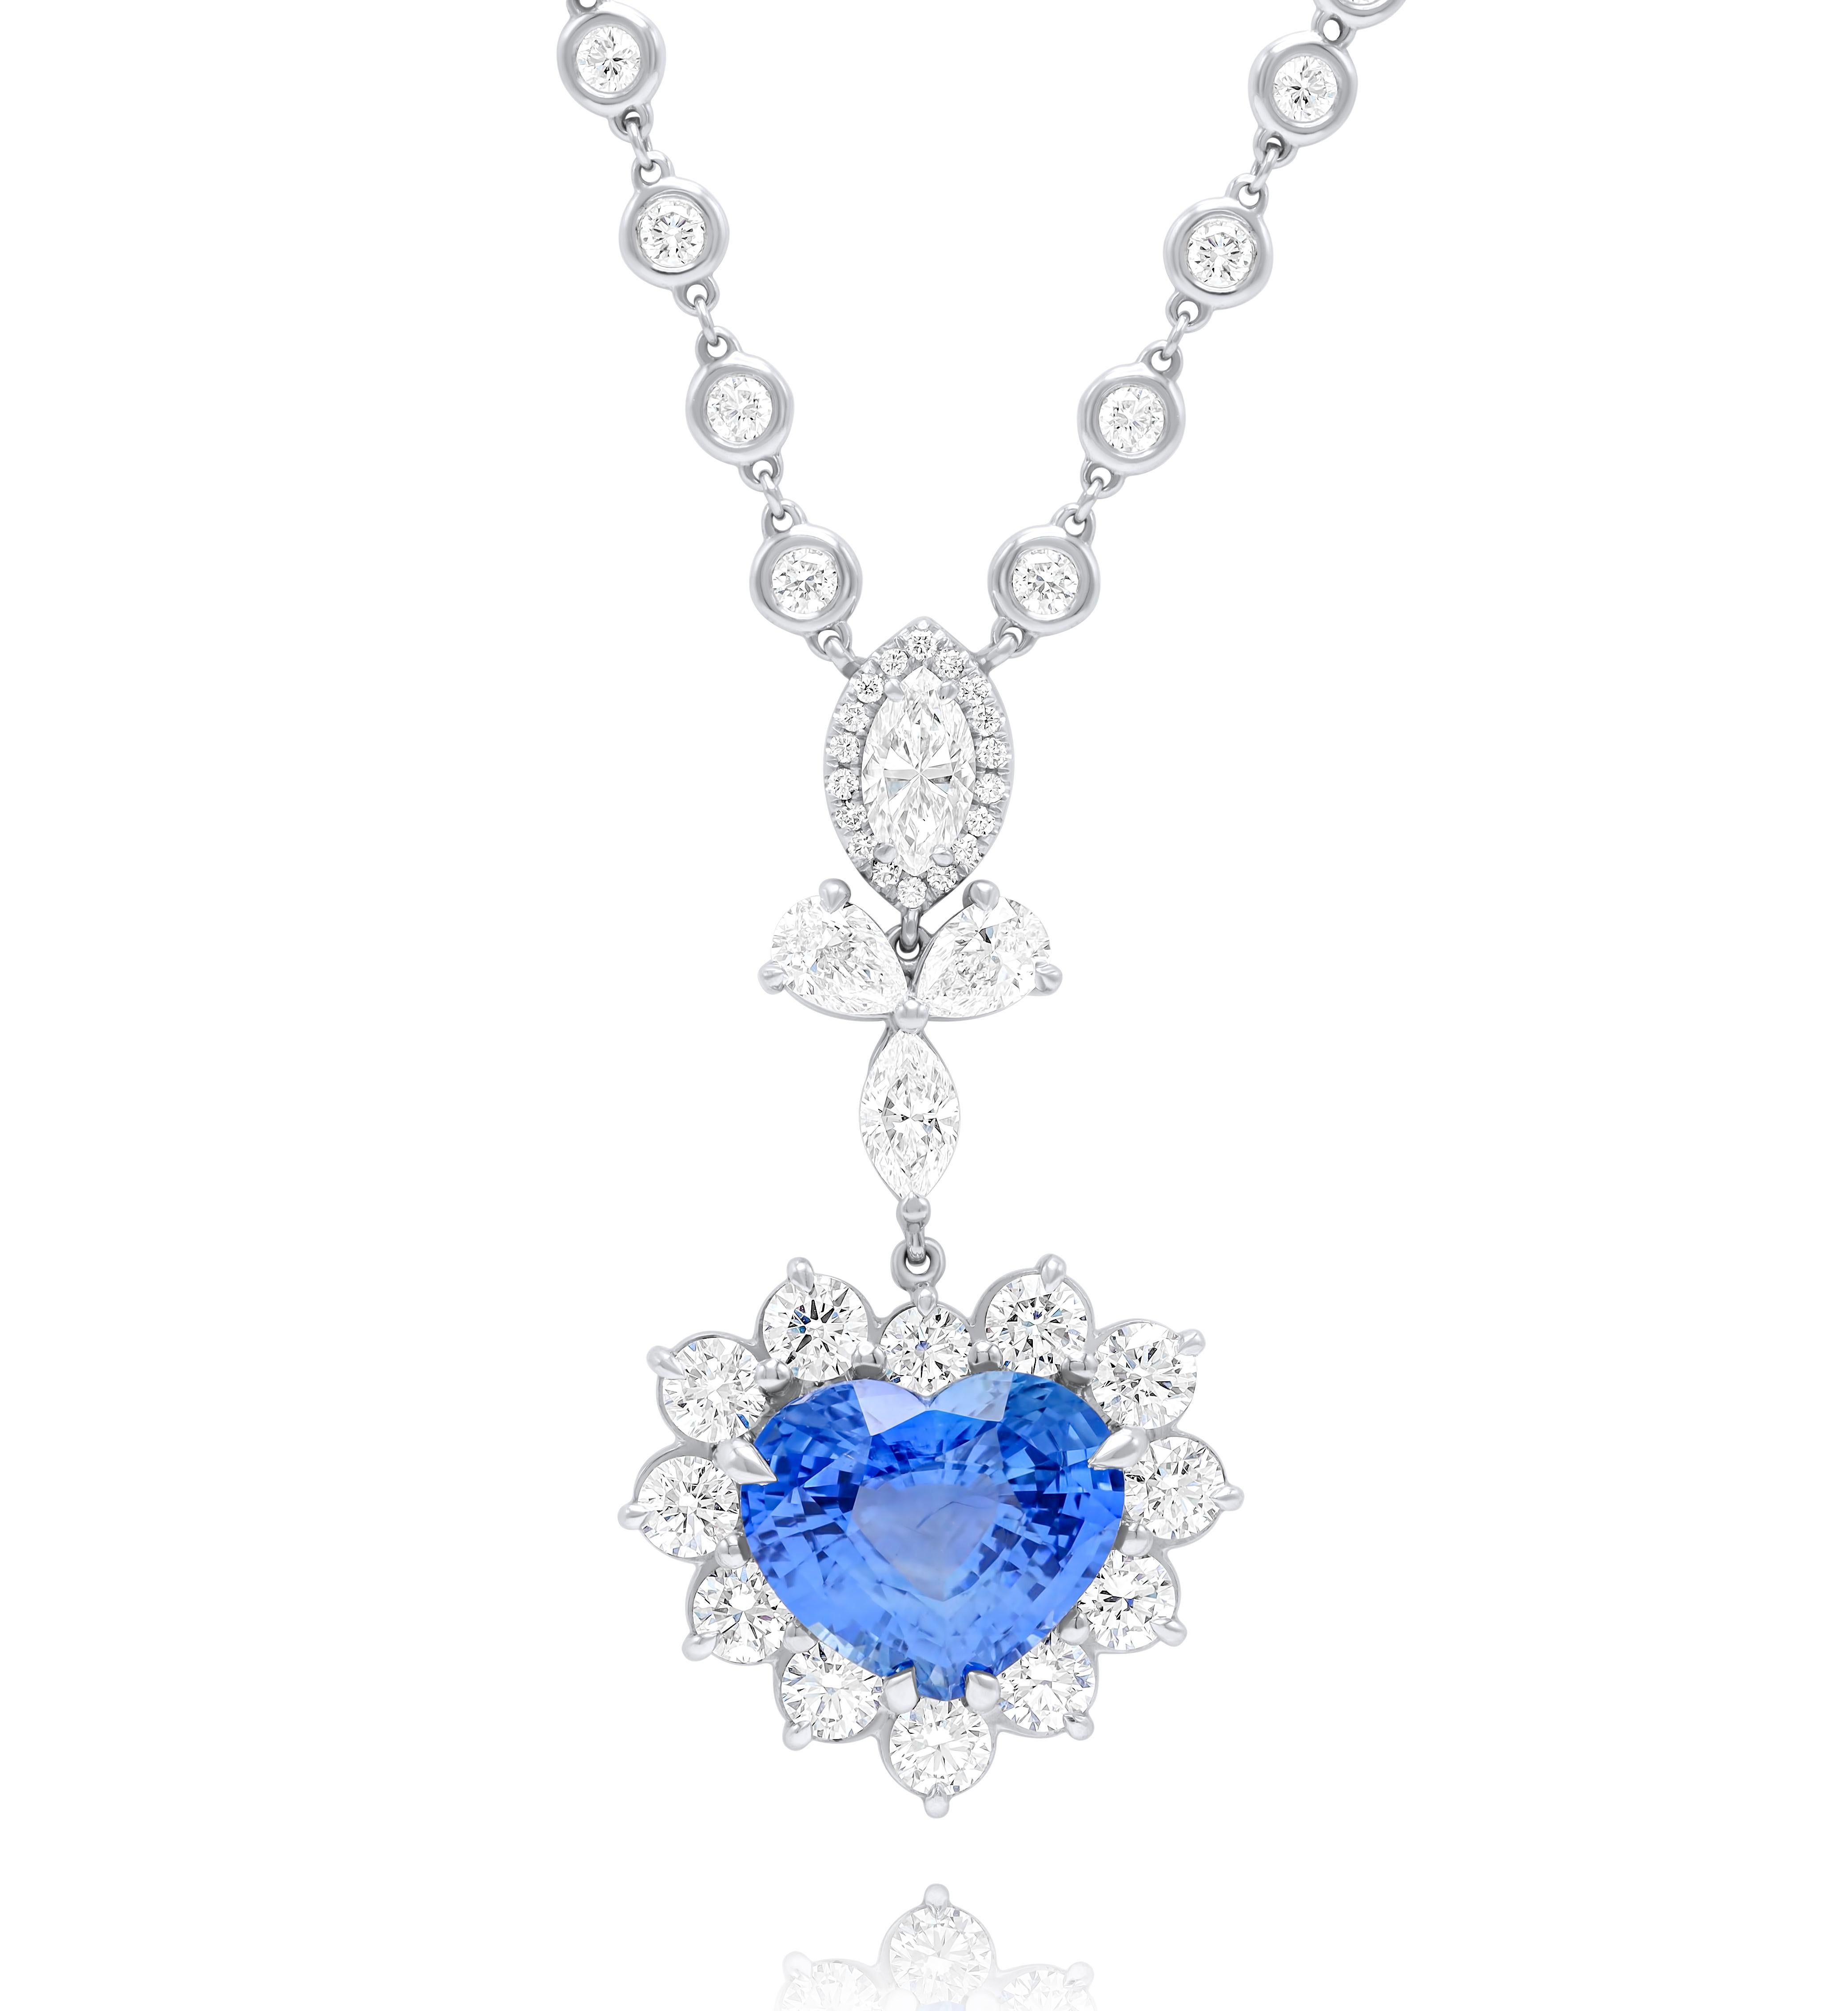 18kt Ceylon sapphire heart shape pendent with 8.18ct heart shape GRS certified and adorned with 8.35cts of white diamonds all set in white gold.